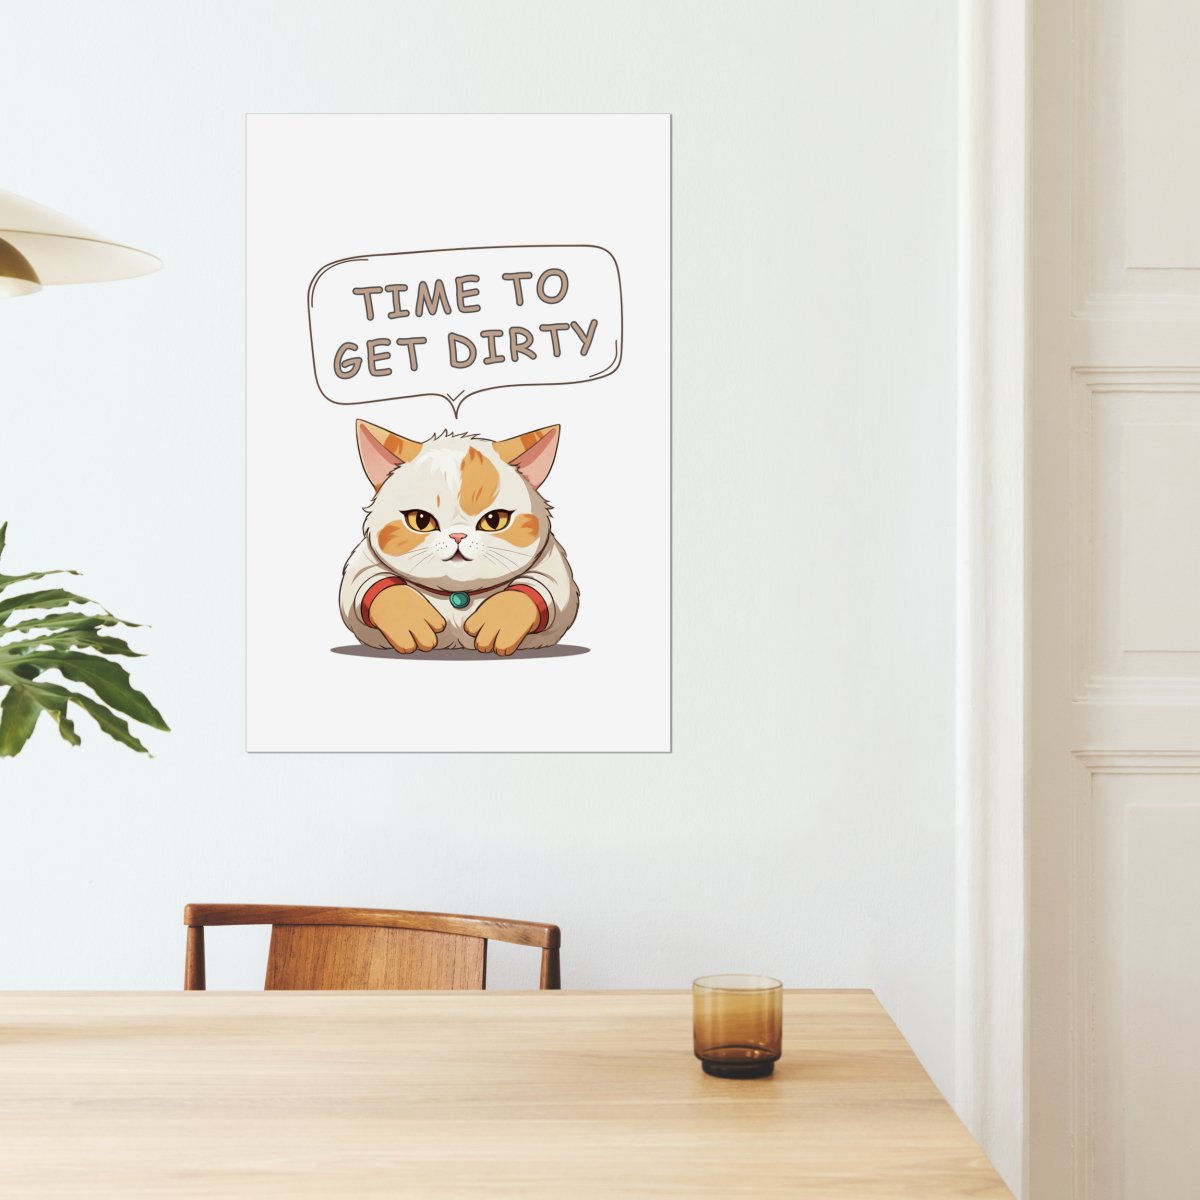 Time to get dirty - Art print - Poster - Ever colorful